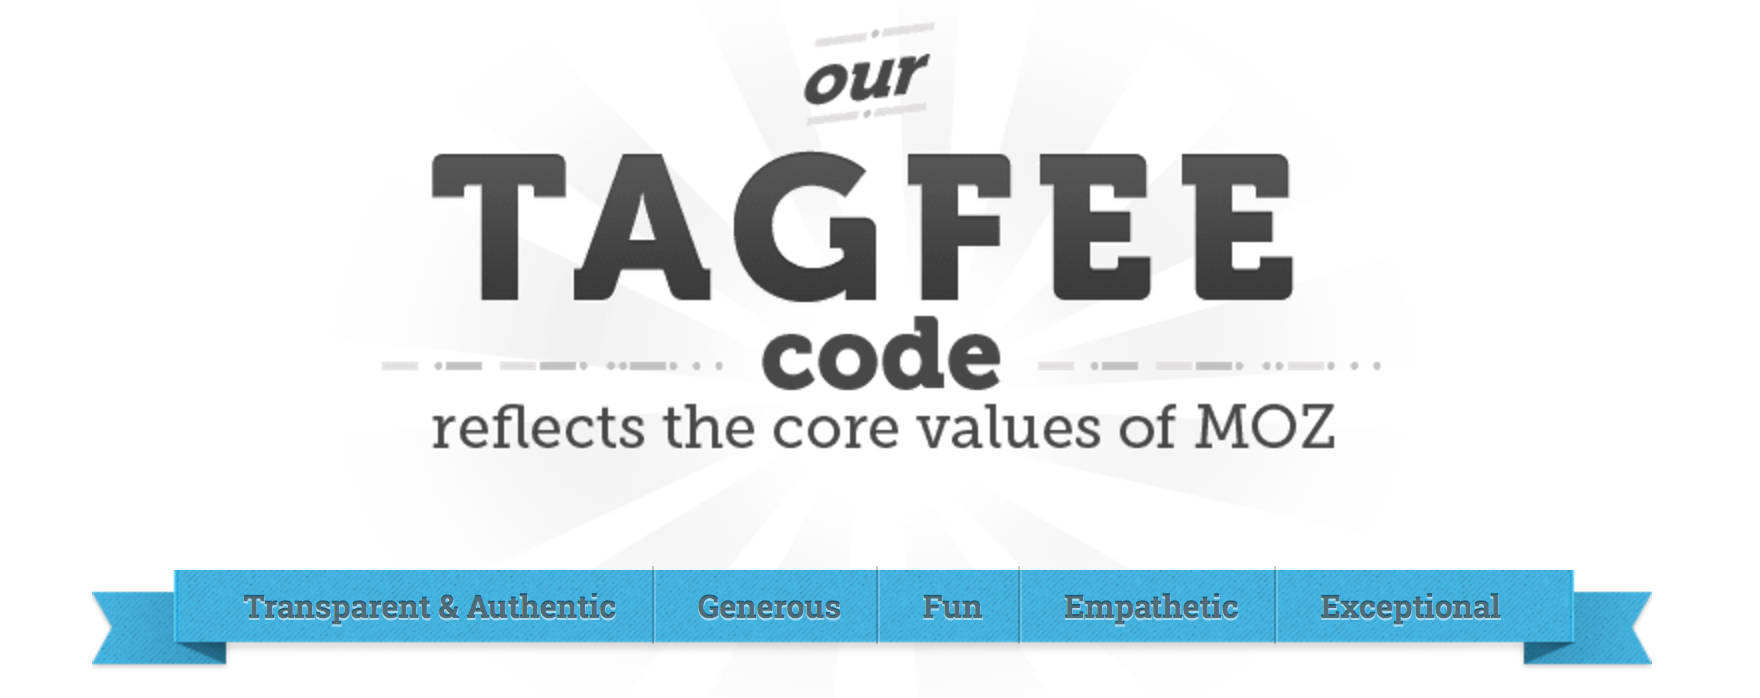 Moz's TAGFEE code begins with Transparency as a core value.